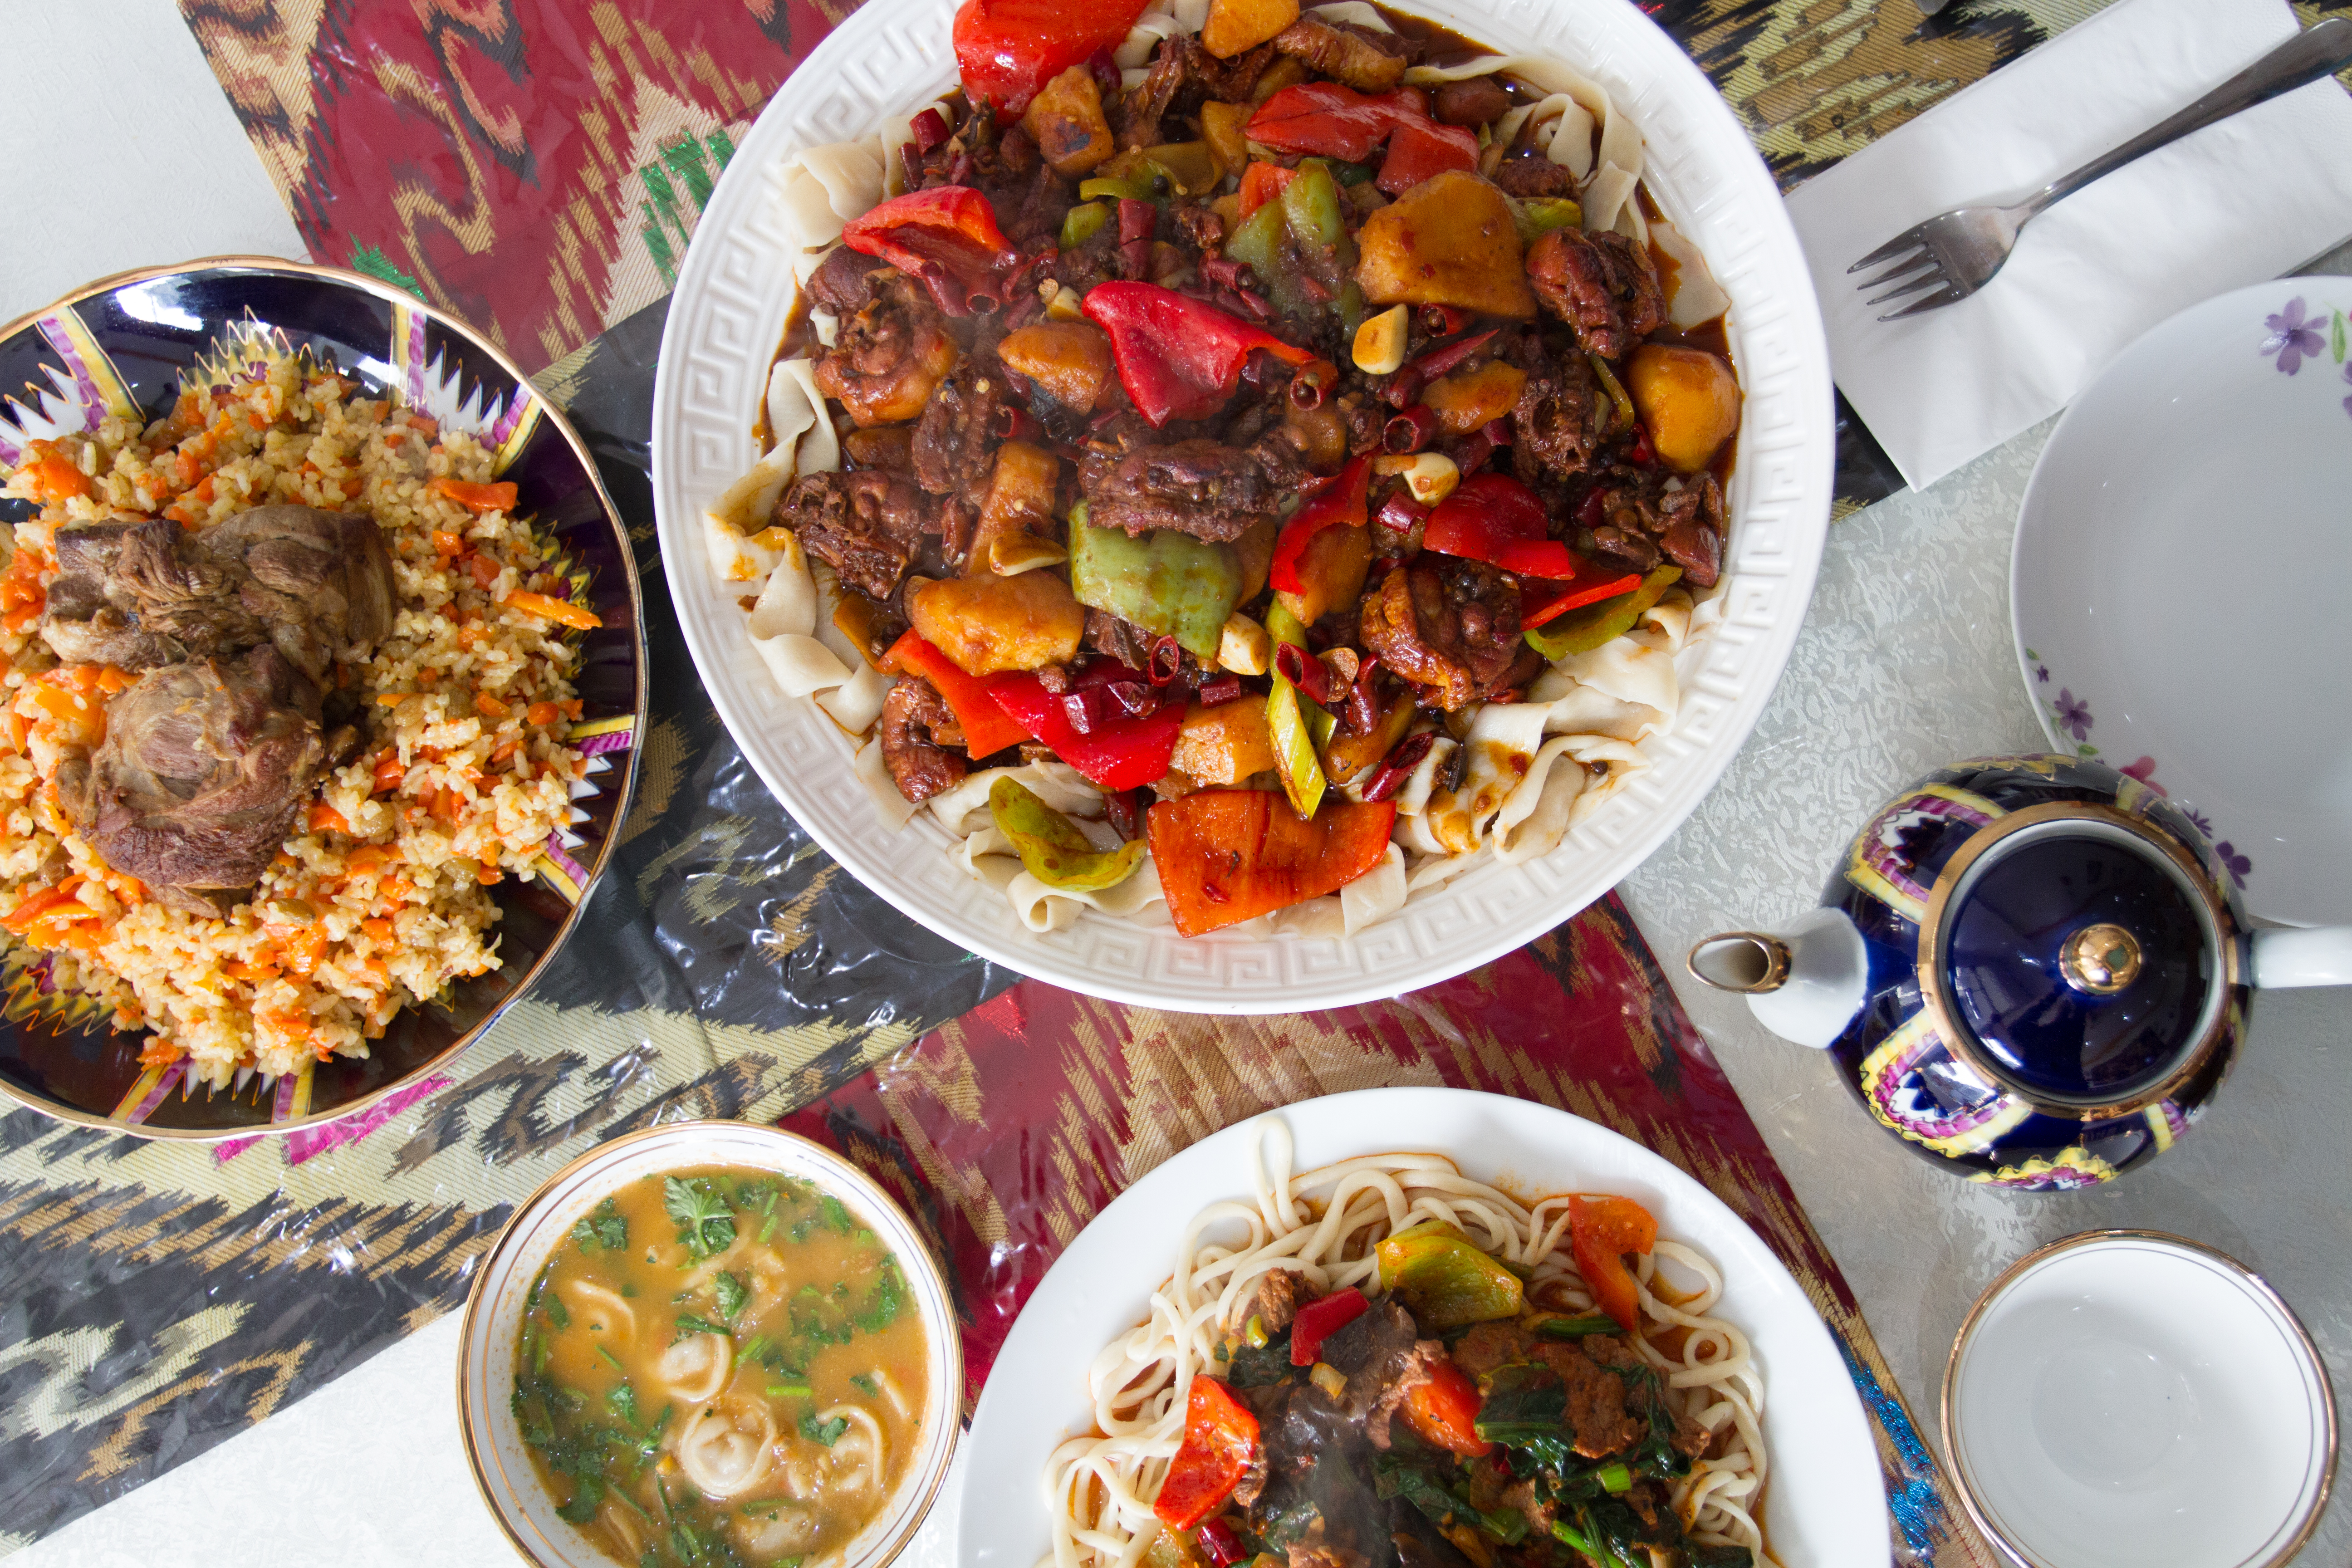 A variety of dishes, including a meat and vegetable platter, rice and noodles, and soup.